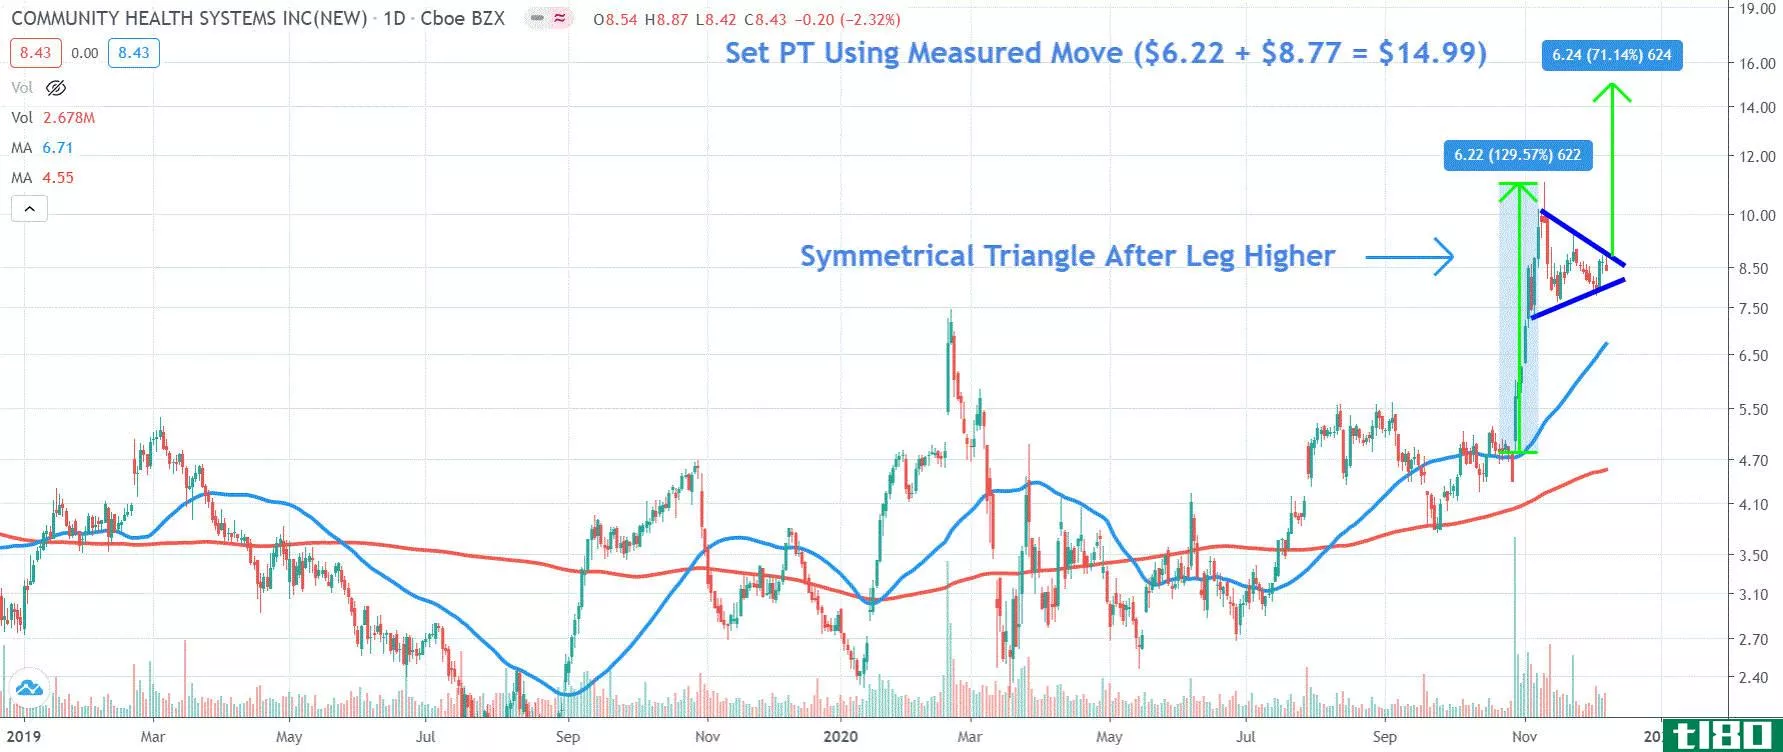 Chart depicting the share price of Community Health Systems, Inc. (CYH)